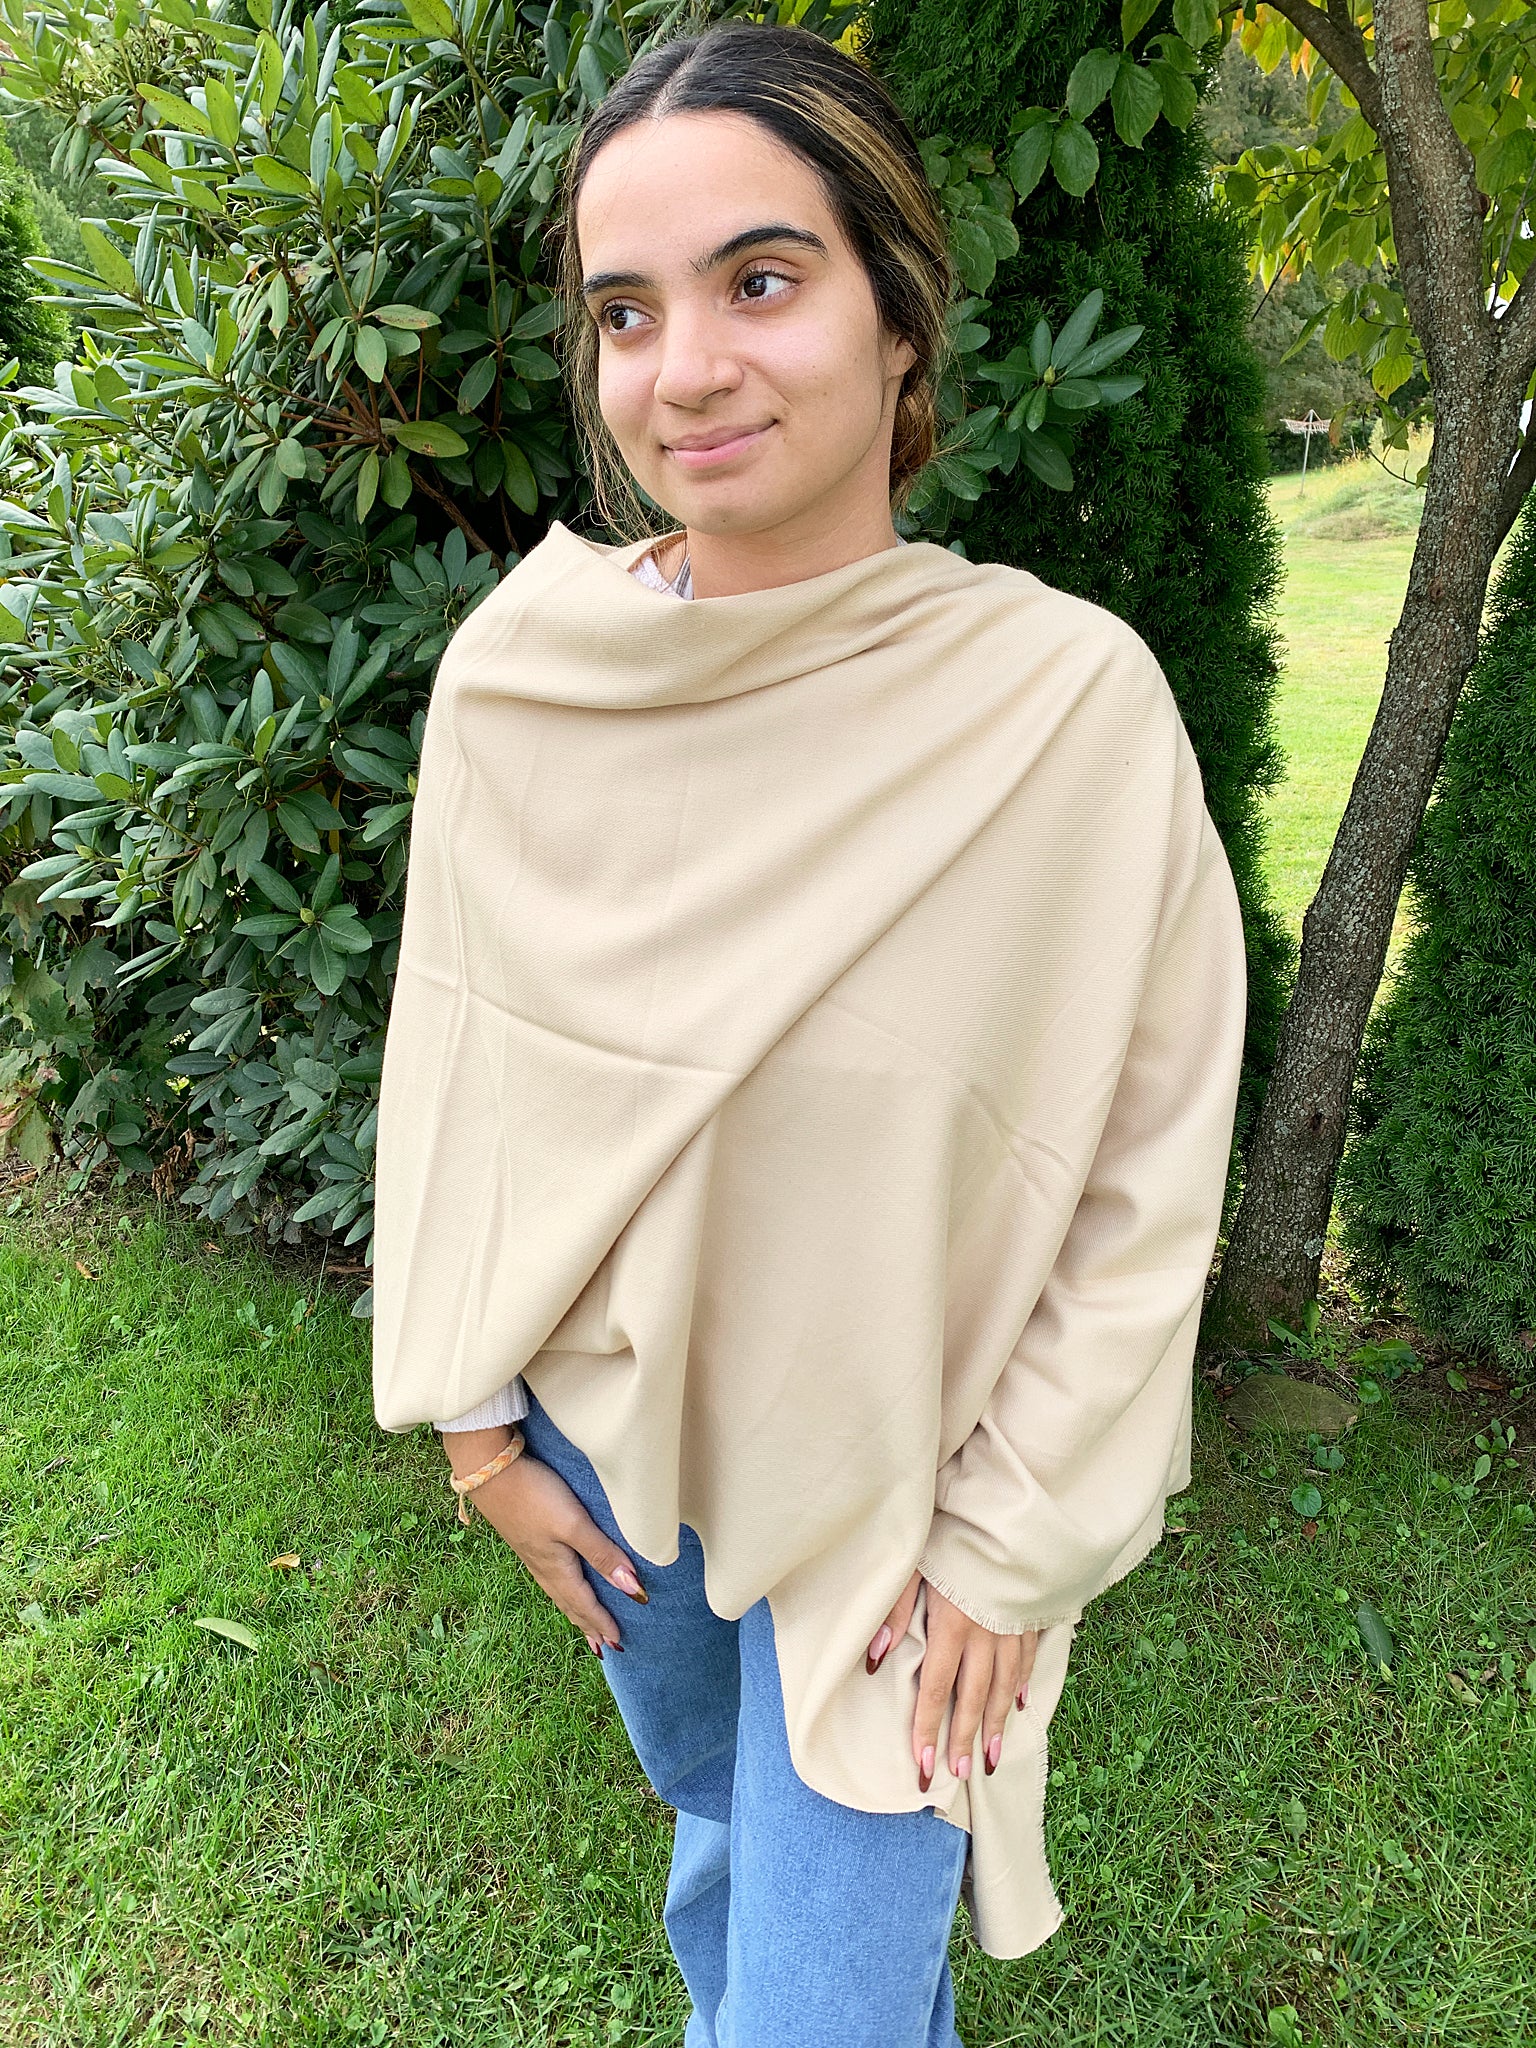 Blue Pacific Cashmere and Silk Poncho in Camel Tan